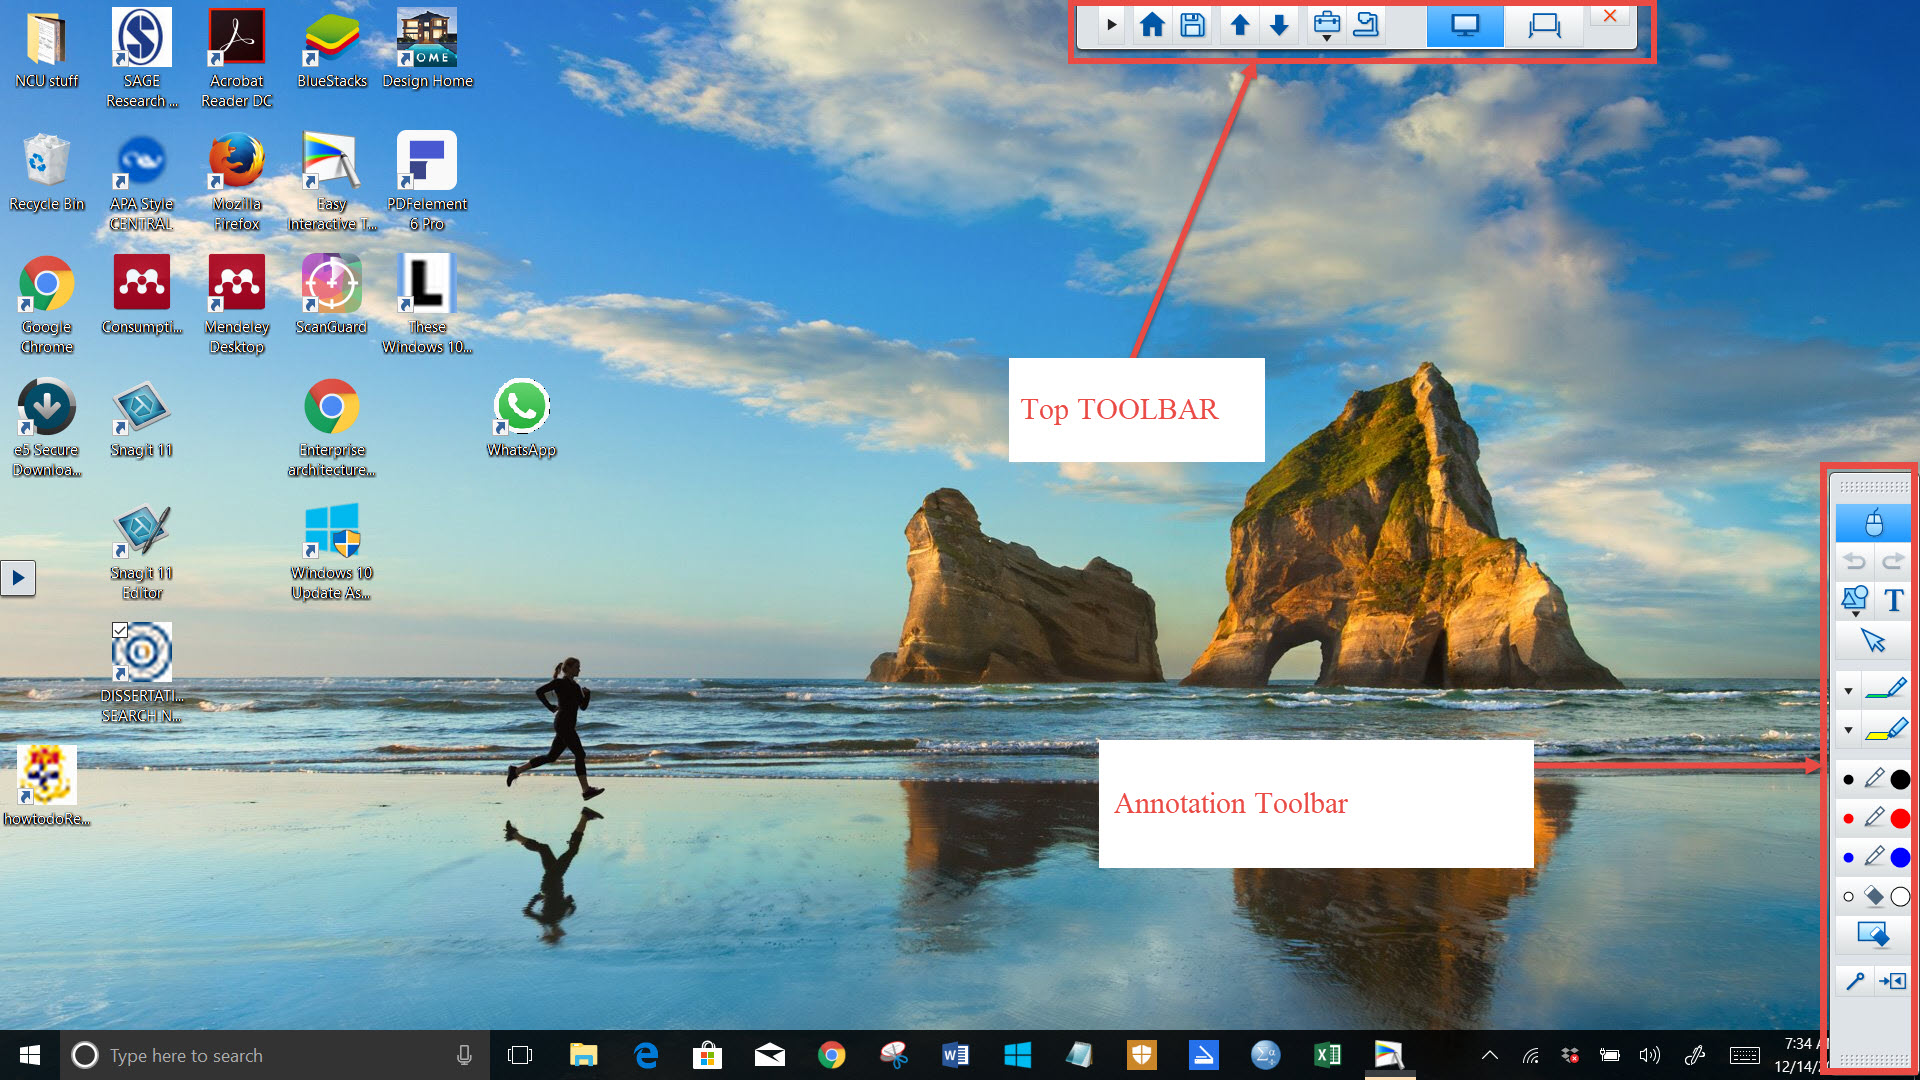 Top and annotation toolbar will be displayed